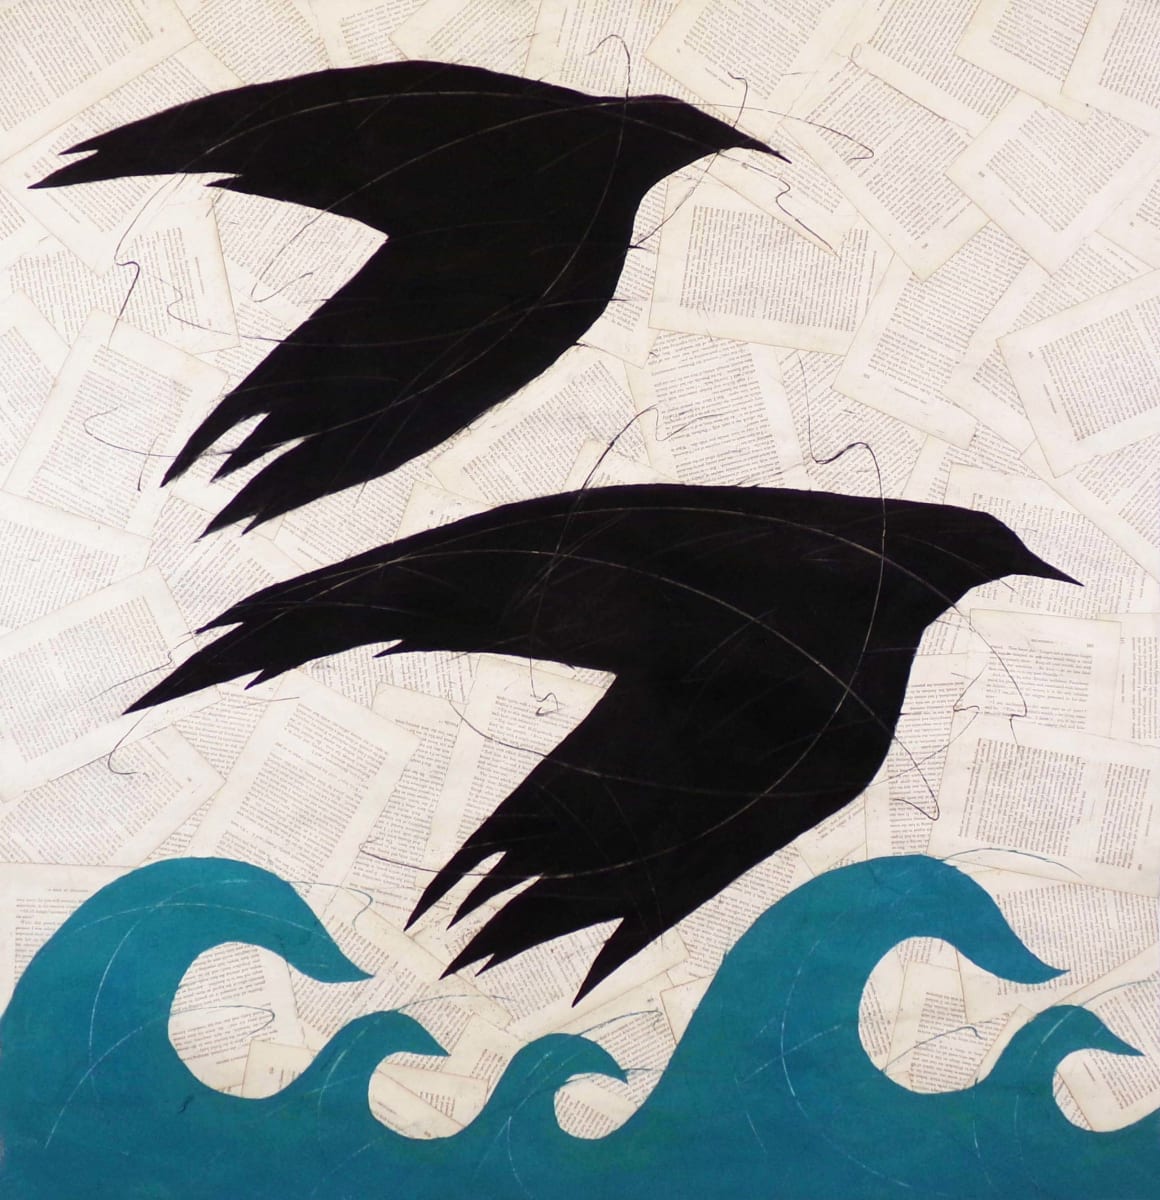 Water Birds Over the Sea by Louise Laplante  Image: Water Birds Over the Sea